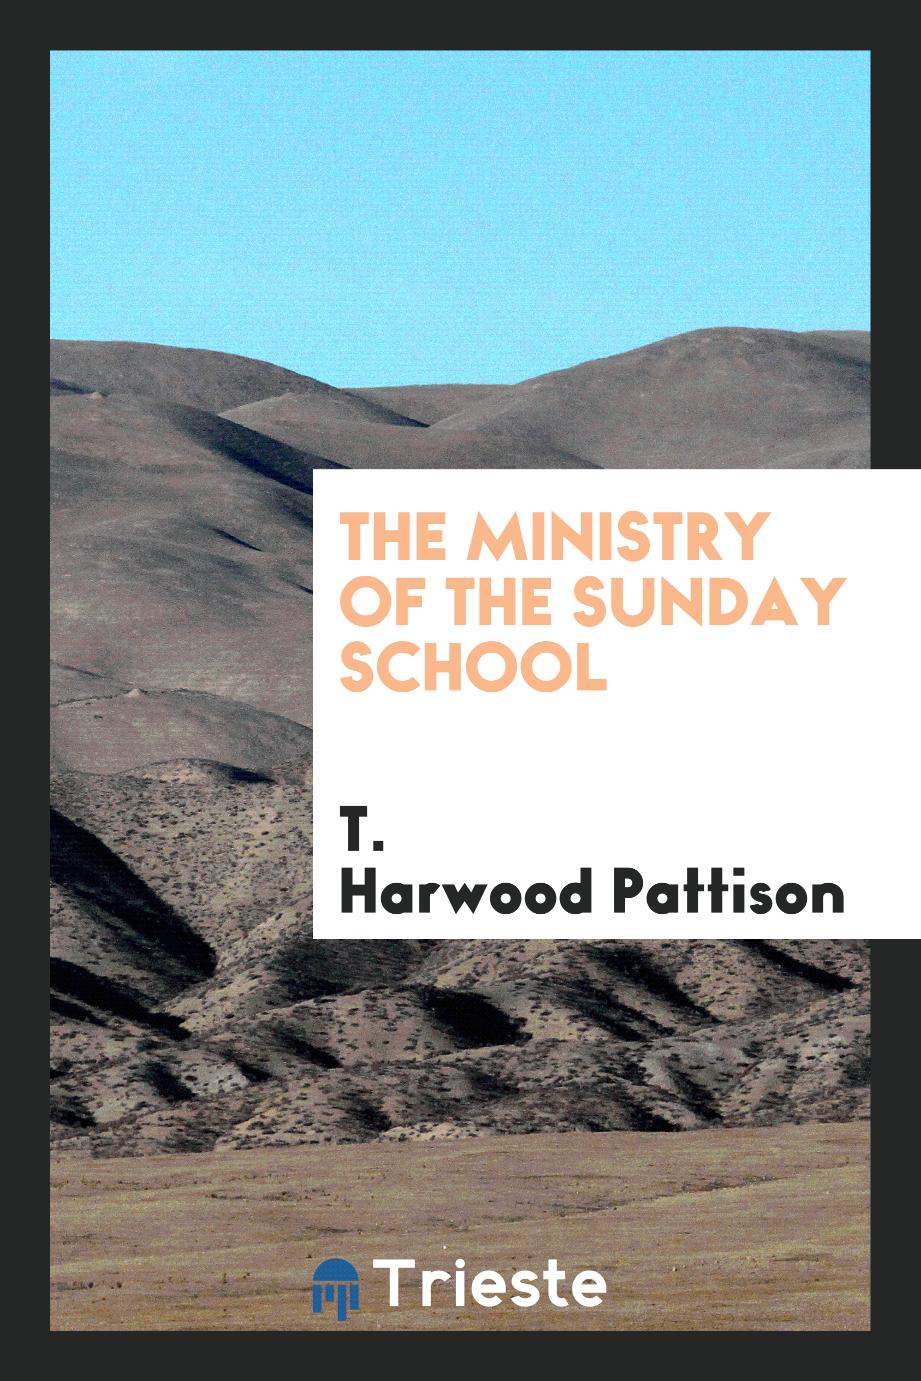 The ministry of the Sunday School